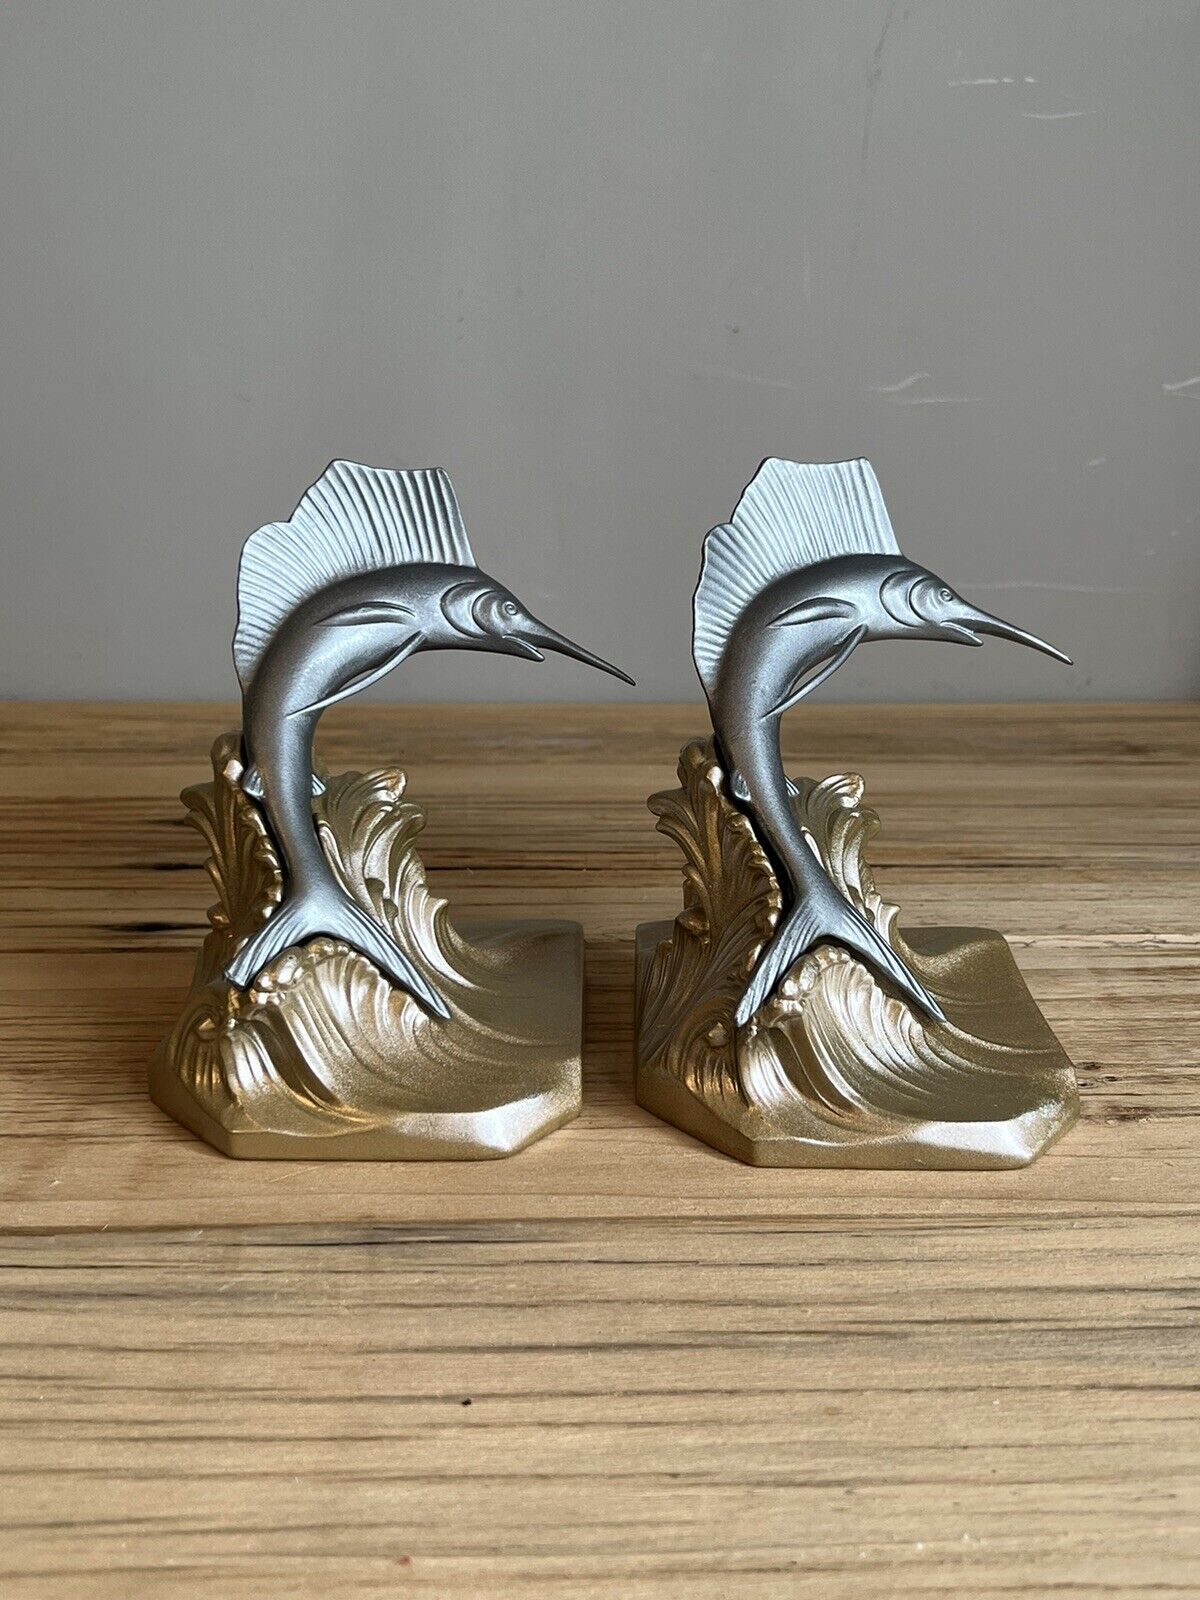 Antique Jennings Brothers USA Marlin Swordfish Metal bookends/statue